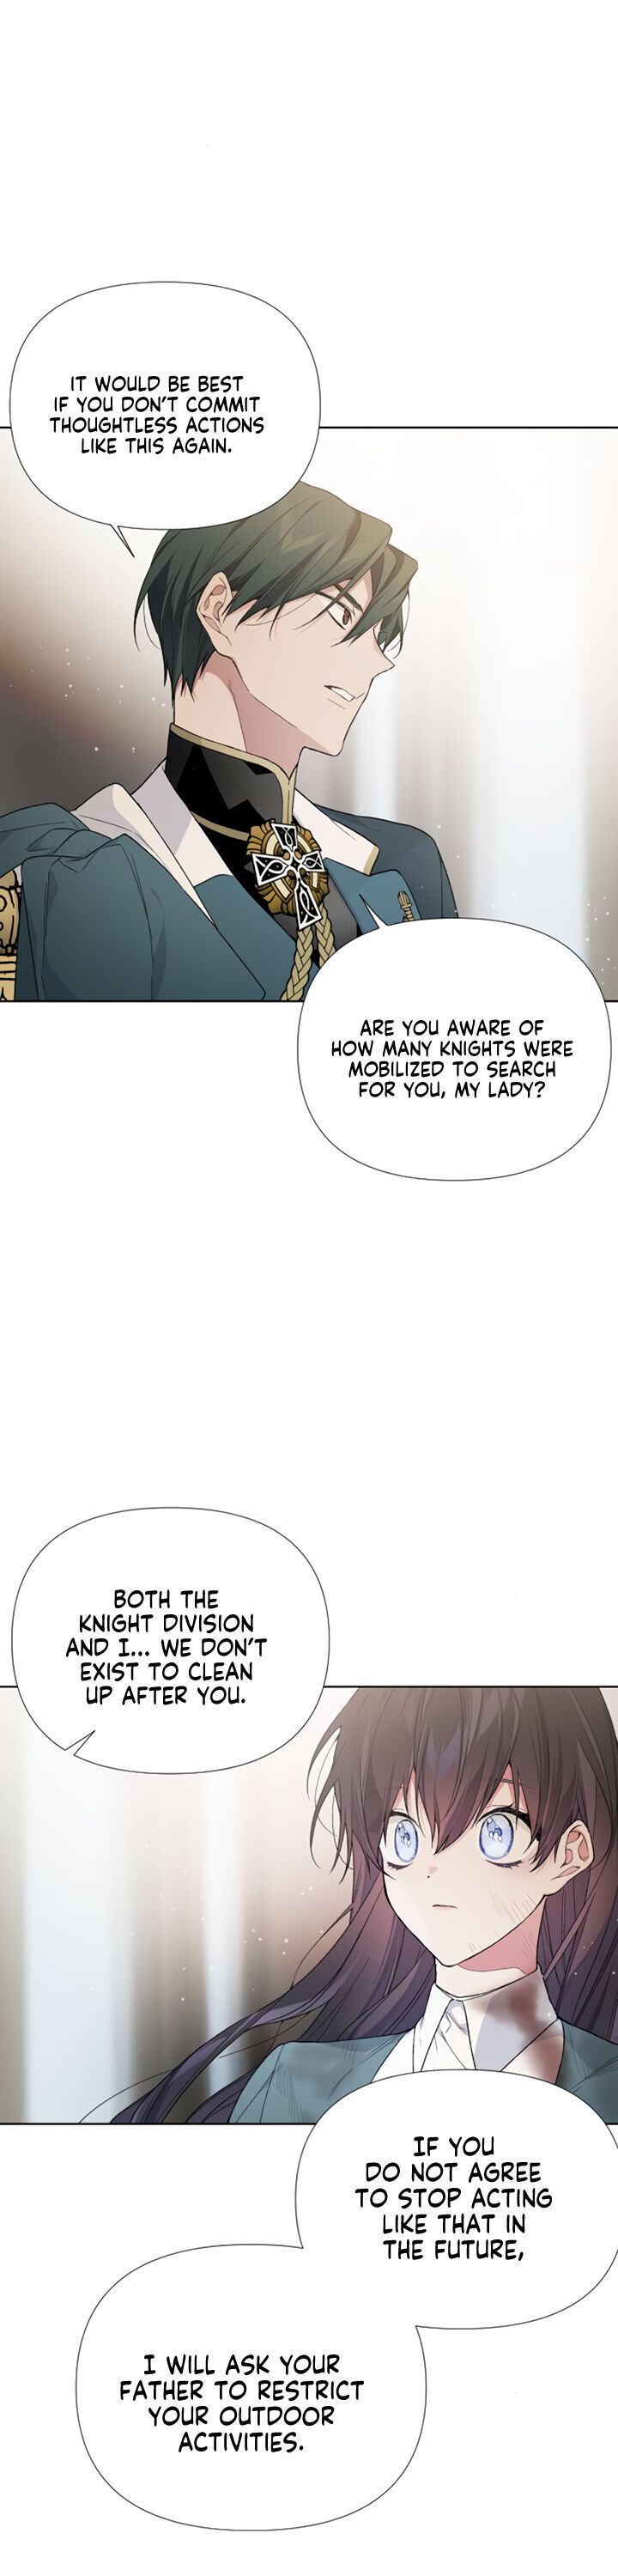 The Way That Knight Lives As a Lady Chapter 11 page 5